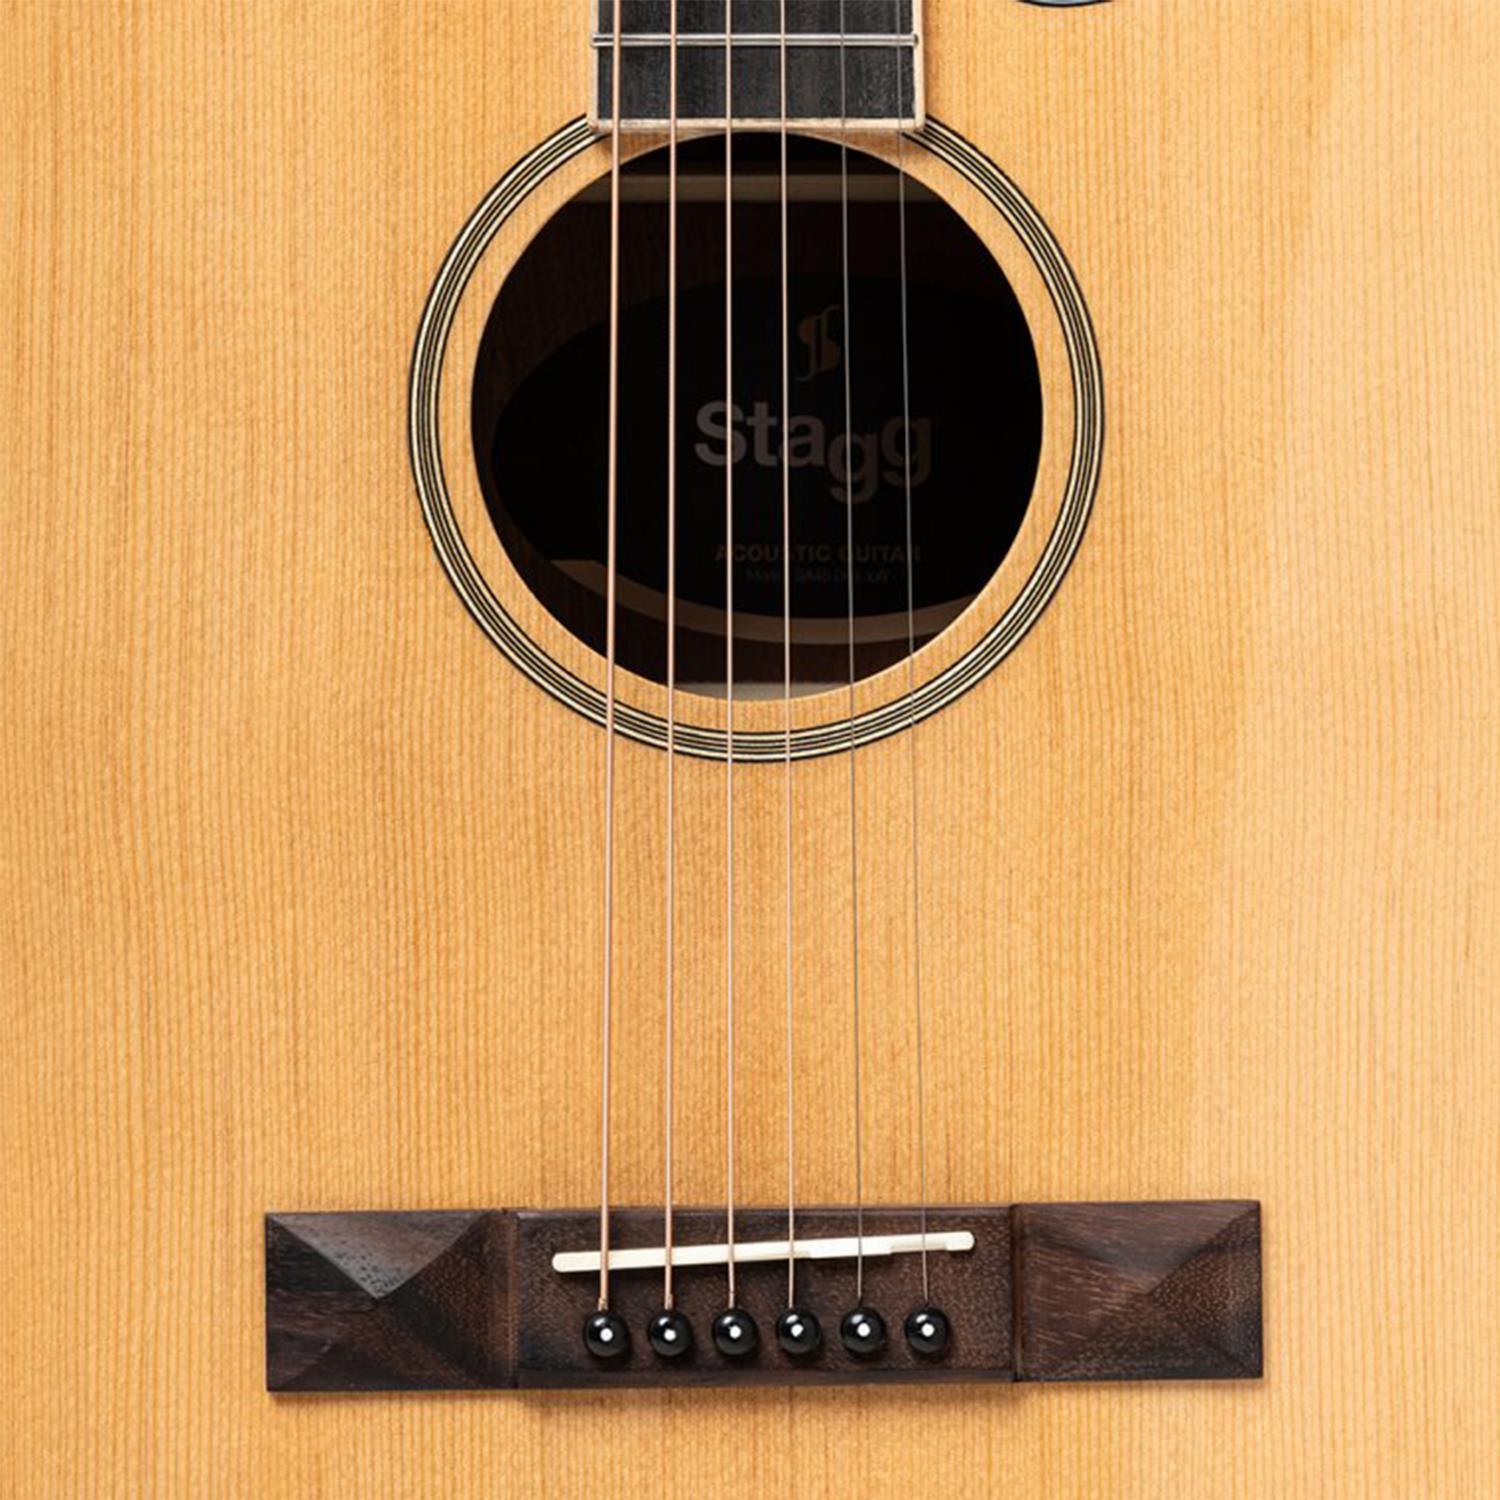 Stagg SA45 DCE-LW Series 45 Natural Dreadnought Cutaway Acoustic Guitar with Spruce Top - DY Pro Audio